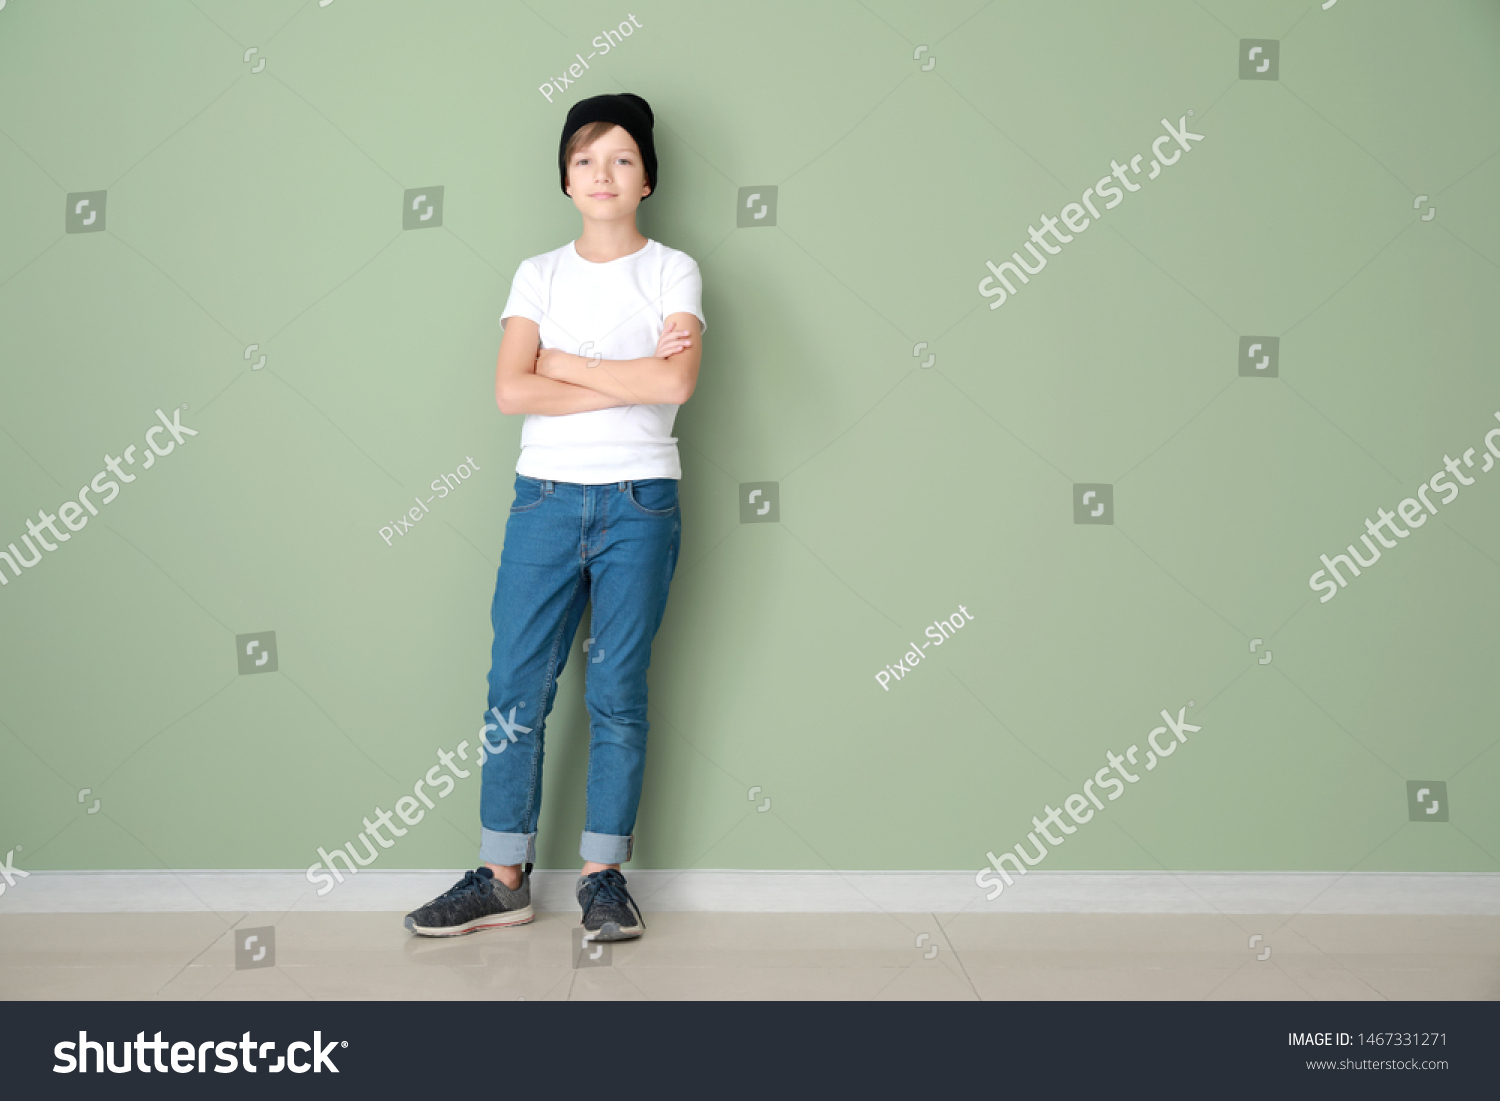 Stylish boy in jeans near color wall #1467331271